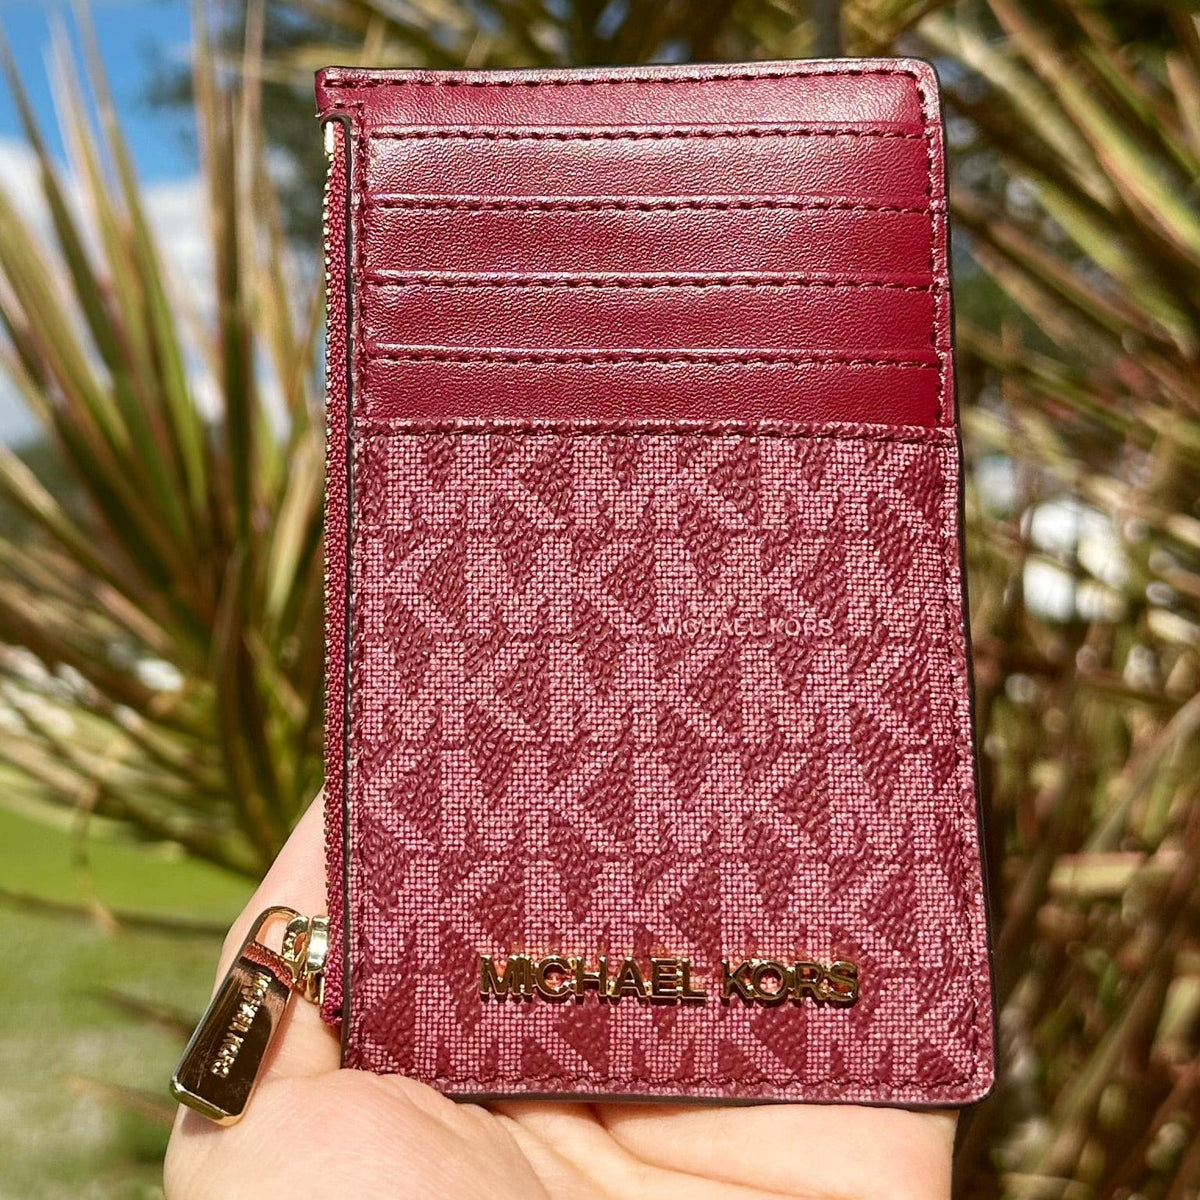 Michael Kors, Bags, Michael Kors Jet Set Small Coin Leather Wallet Red